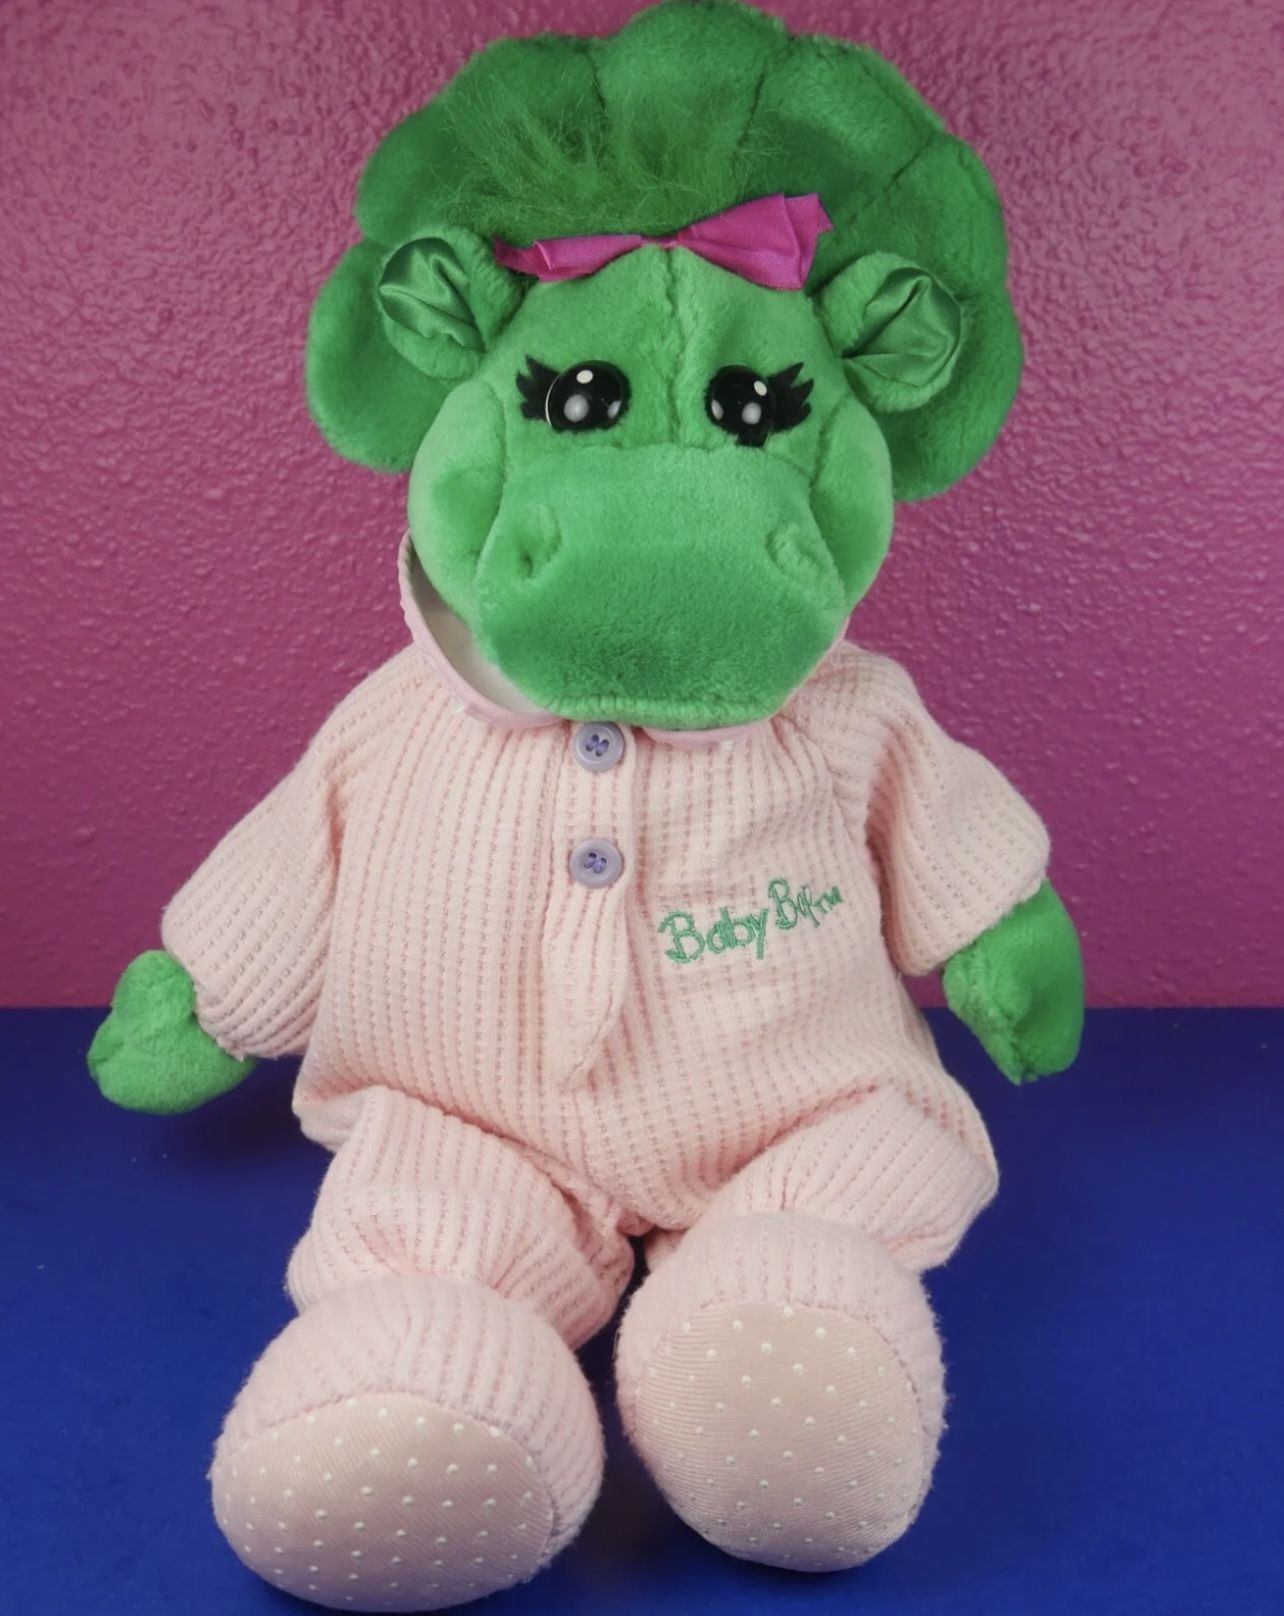 Vintage baby bop doll with nightgown in great condition Barney toy